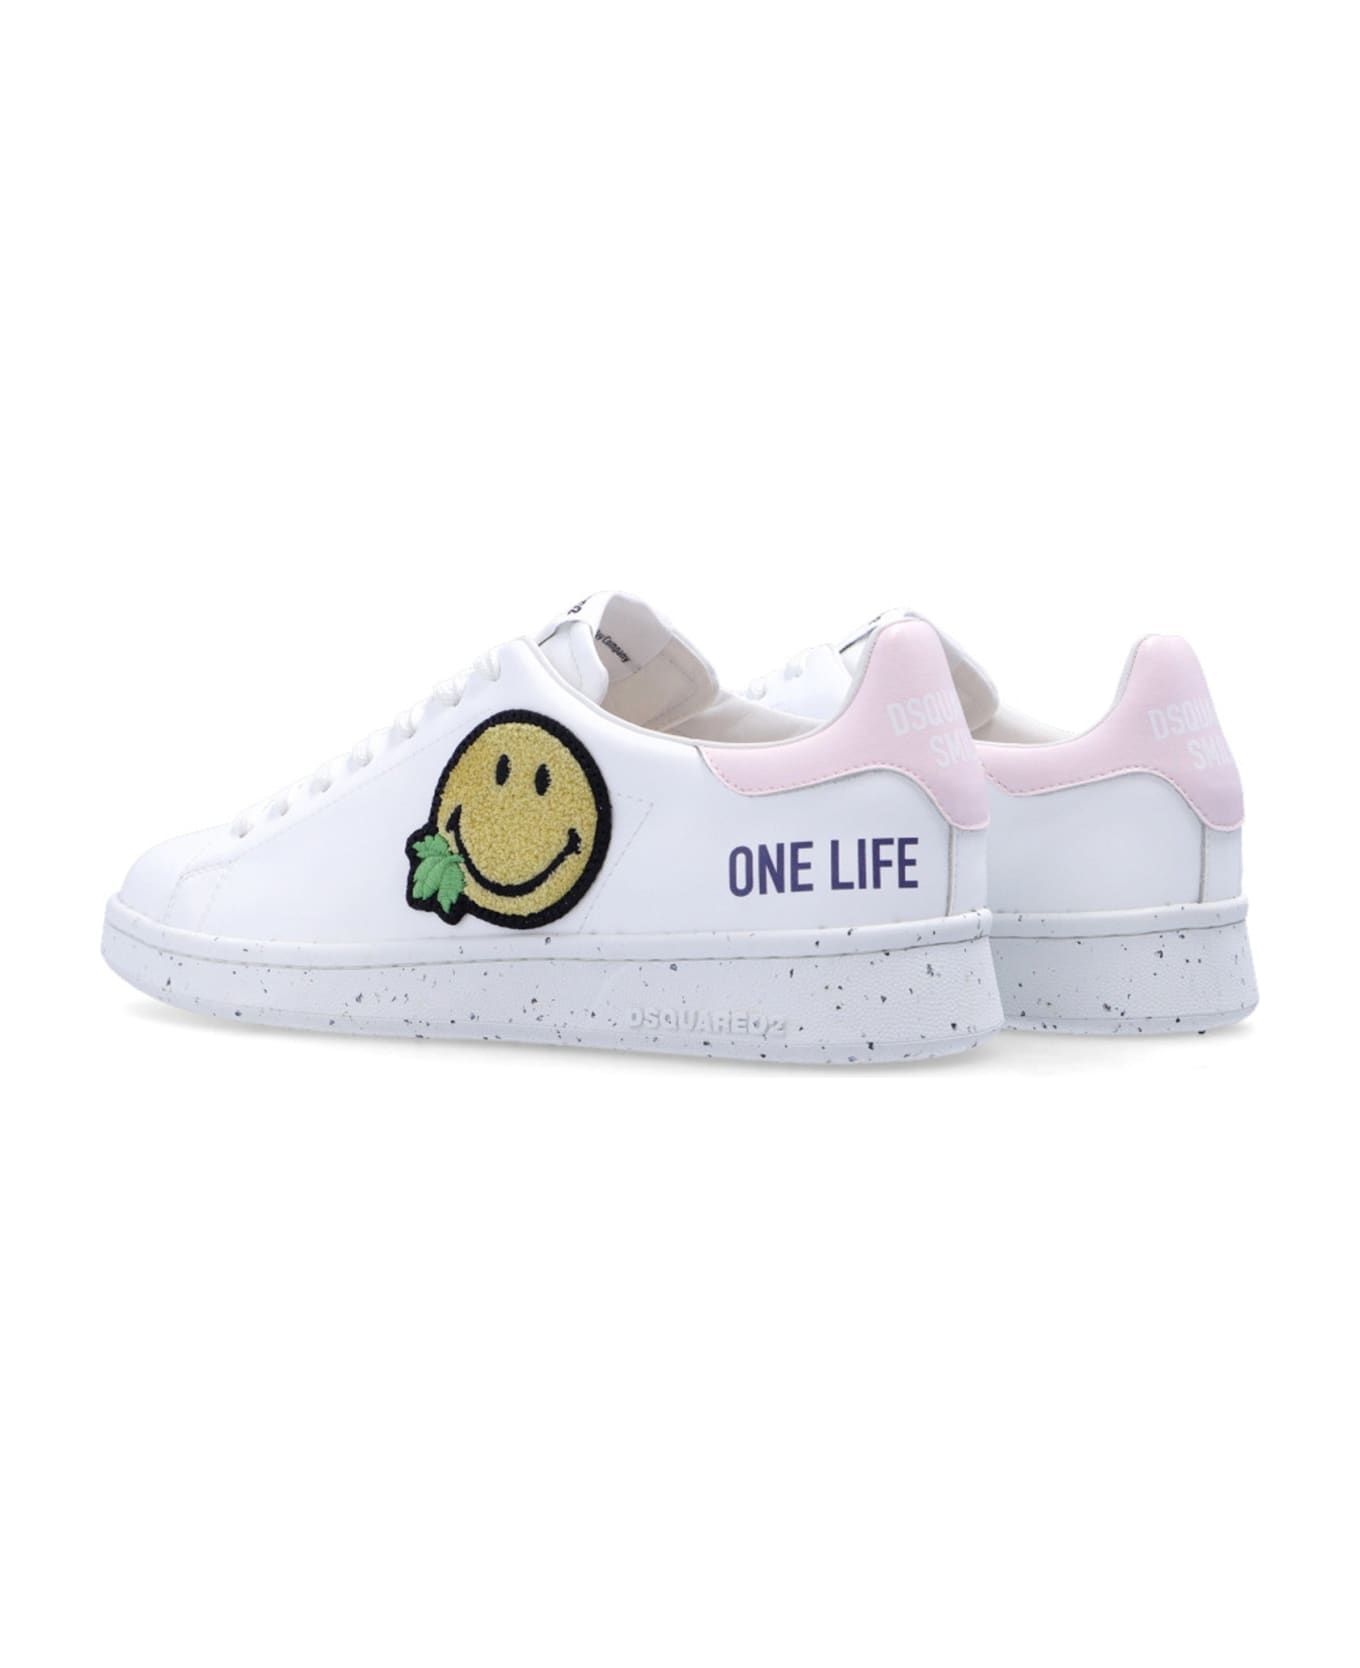 Dsquared2 Smiley Leather Sneakers - White スニーカー